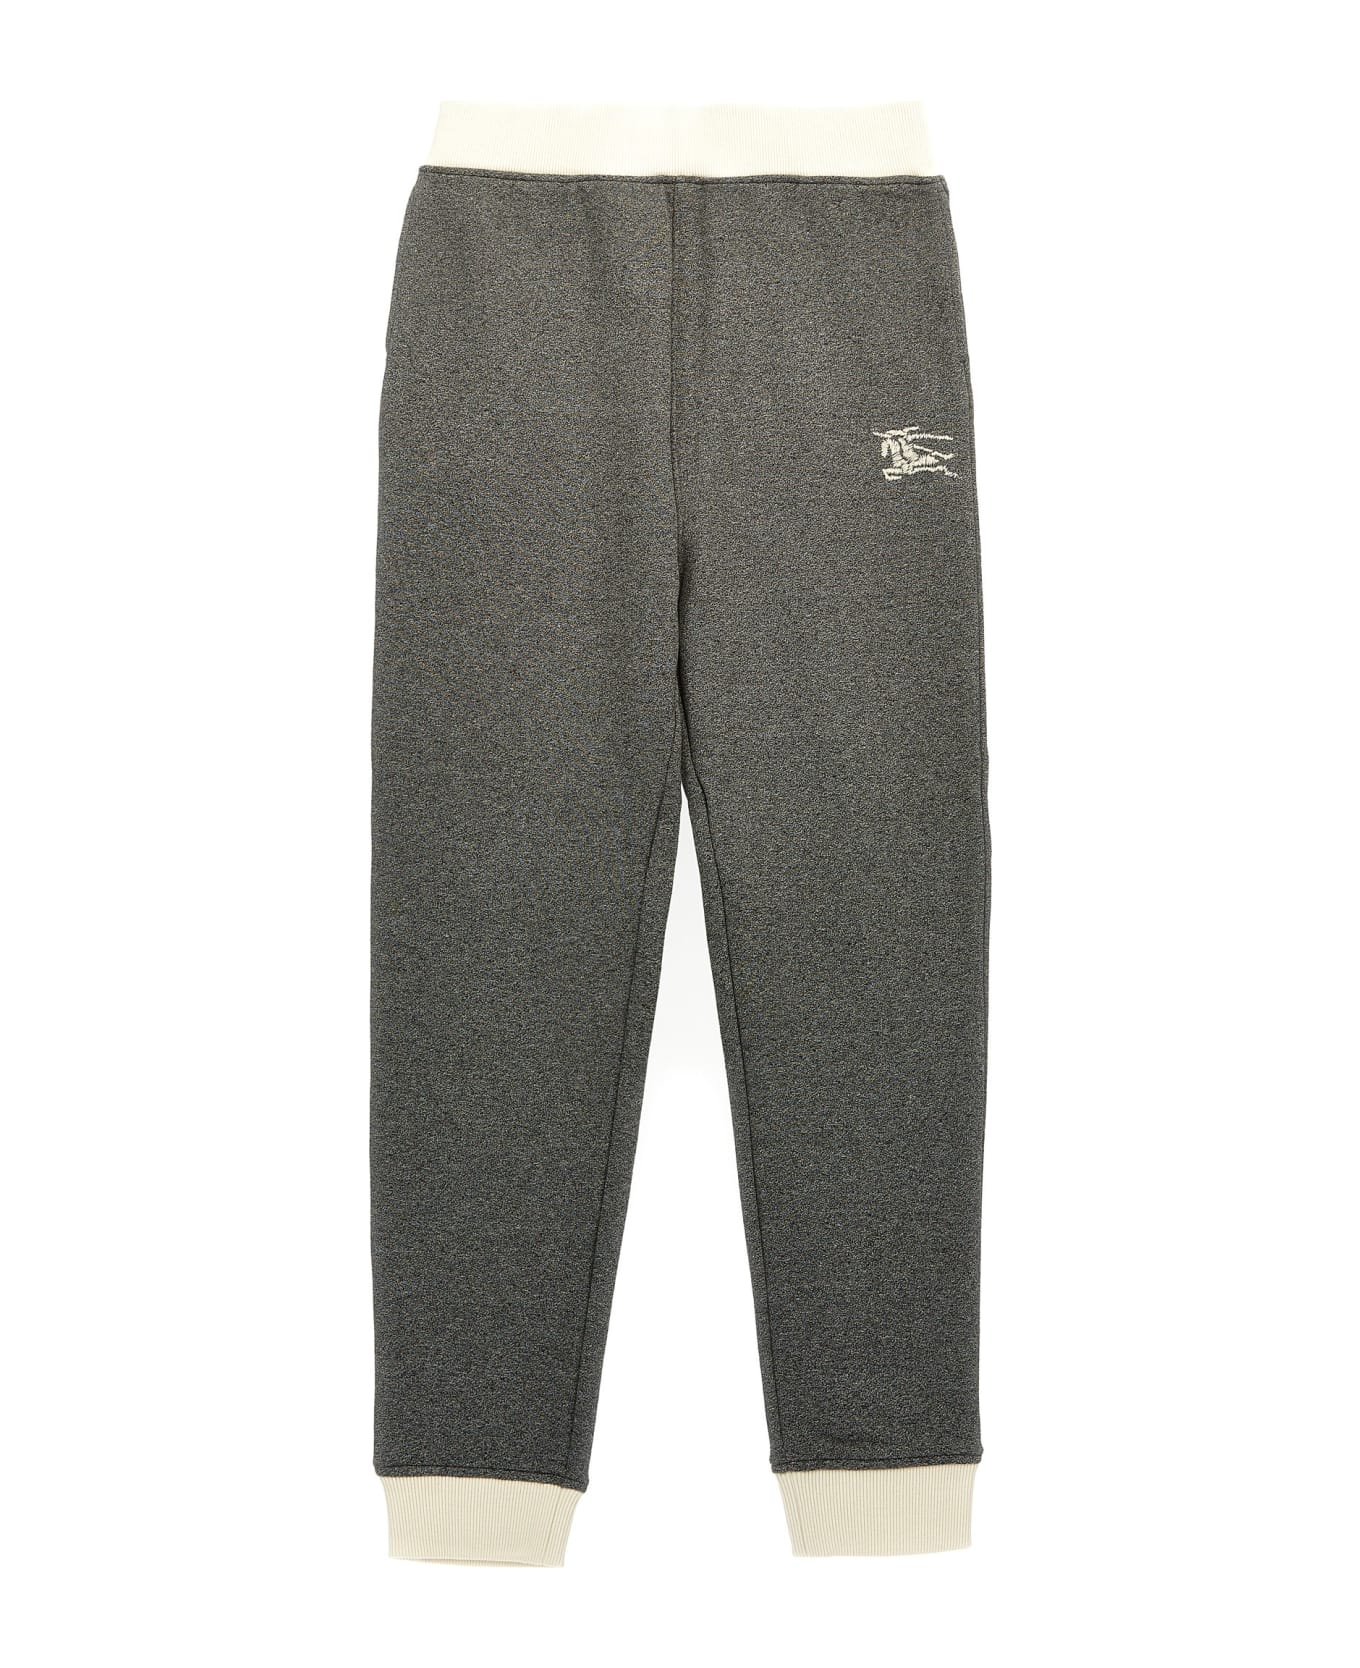 Burberry 'sidney' Joggers - Gray ボトムス